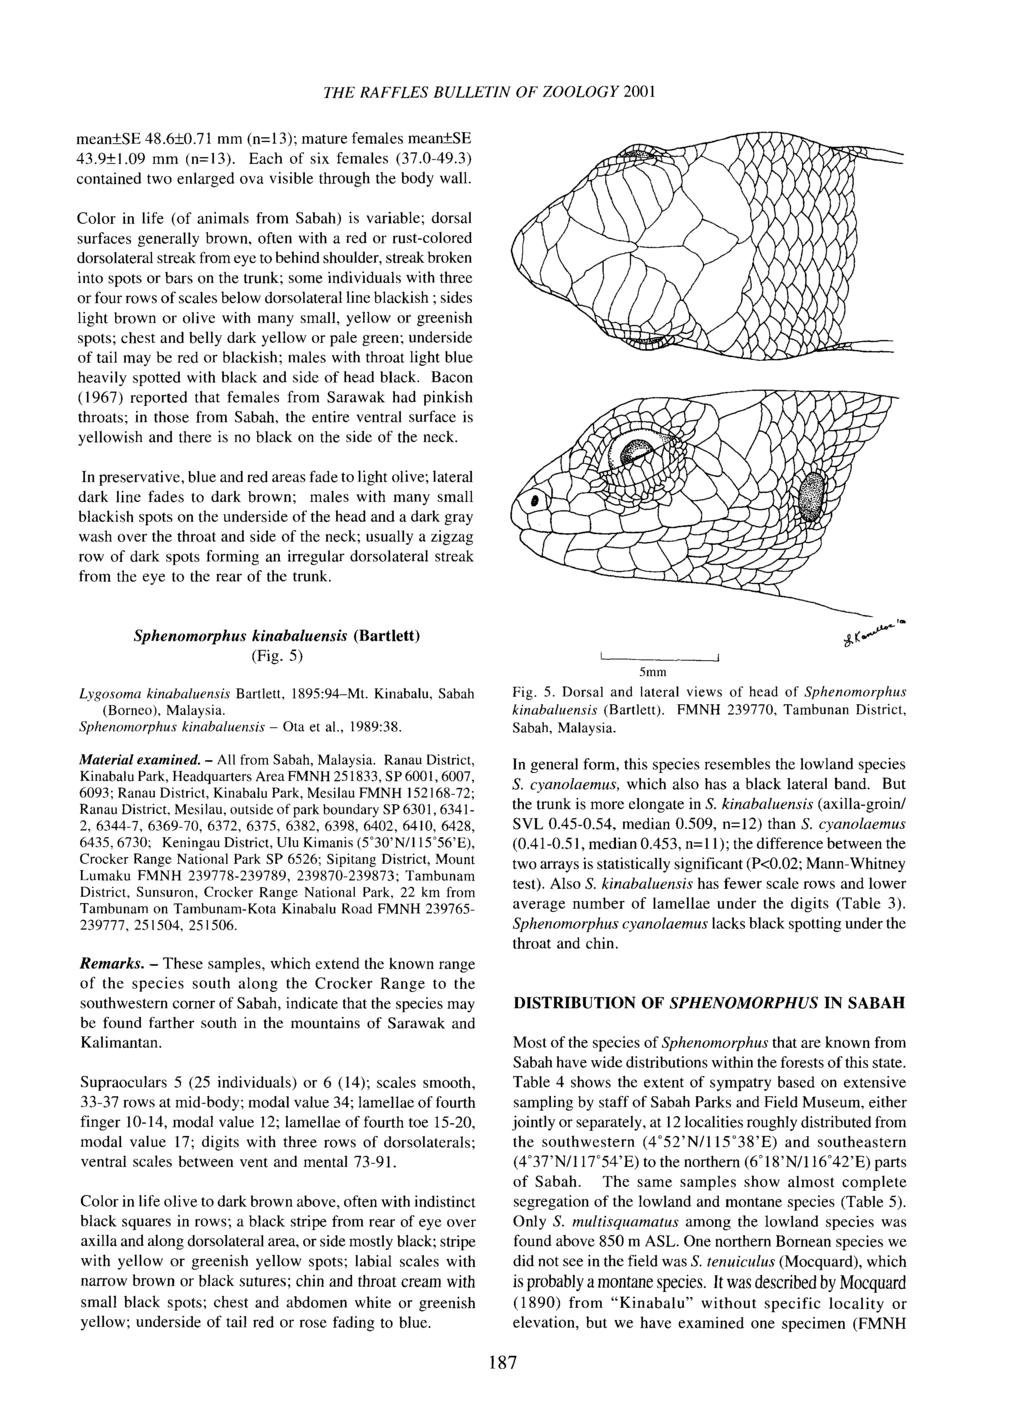 THE RAFFLES BULLETIN OF ZOOLOGY 2001 mean±se 48.6±0.71 mm (n=13); mature females mean±se 43.9±1.09 mm (n=13). Each of six females (37.0-49.3) contained two enlarged ova visible through the body wall.